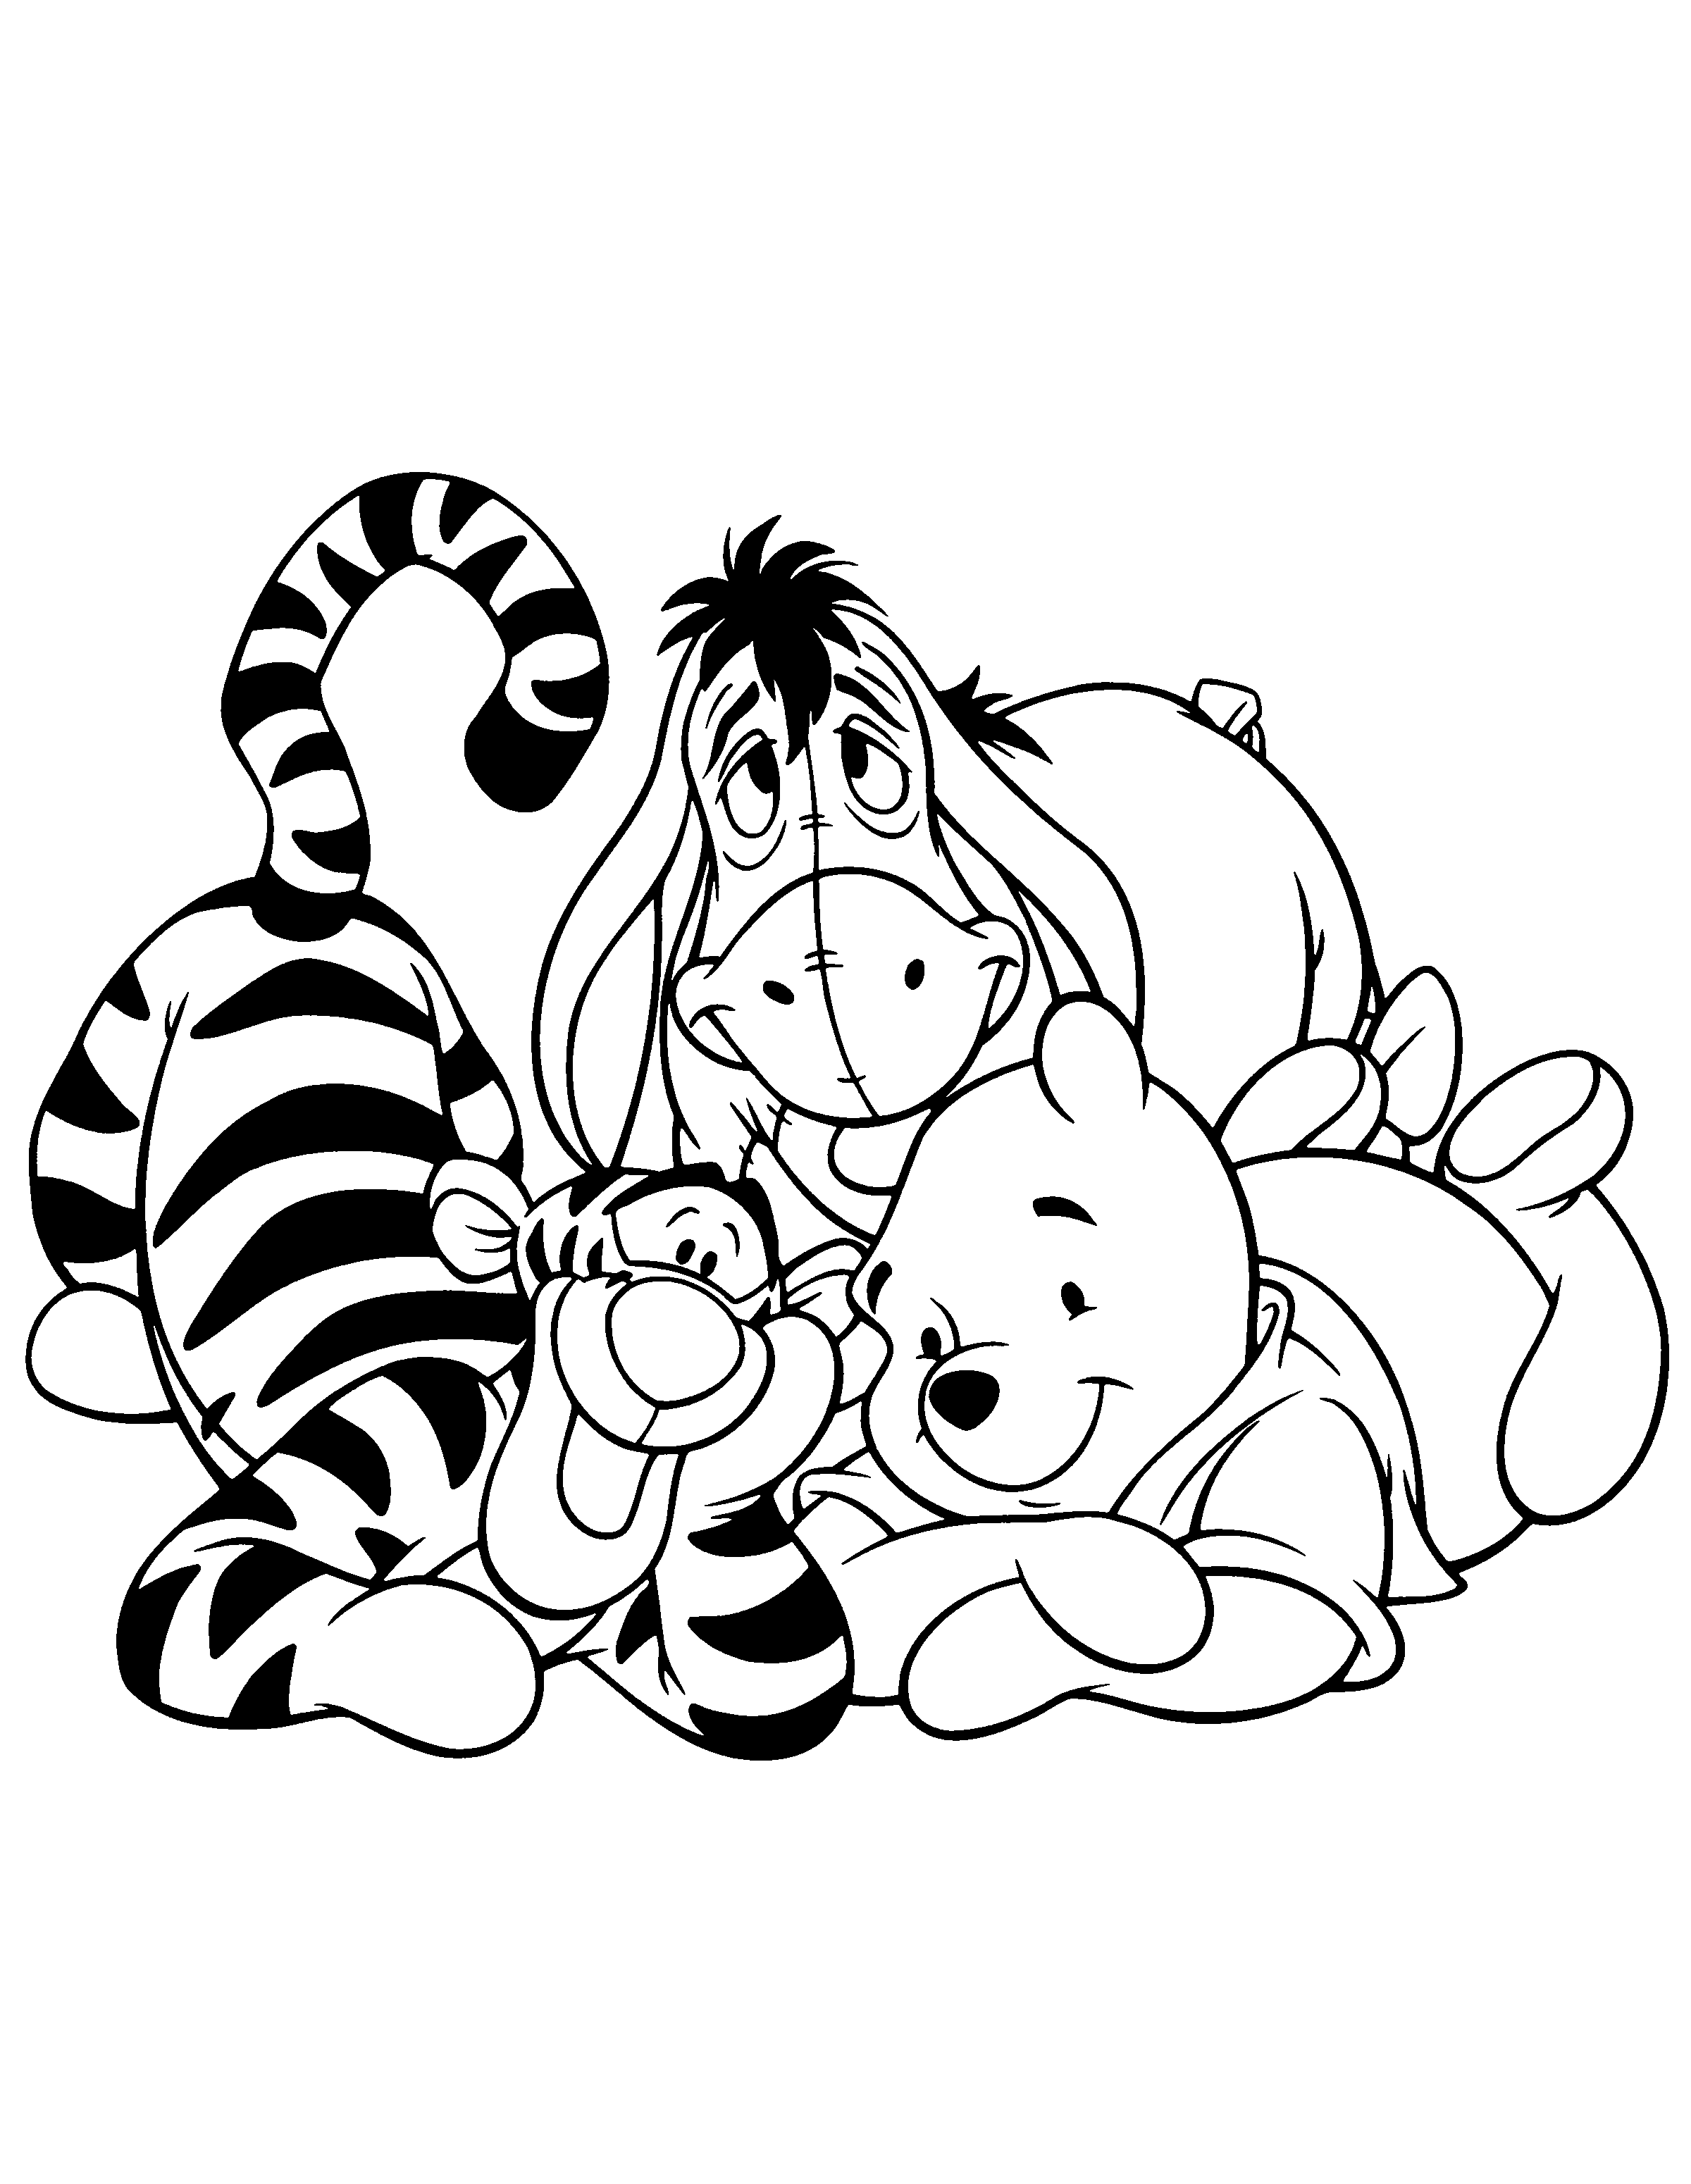 Winnie The Pooh Coloring Page Tv Series Coloring Page